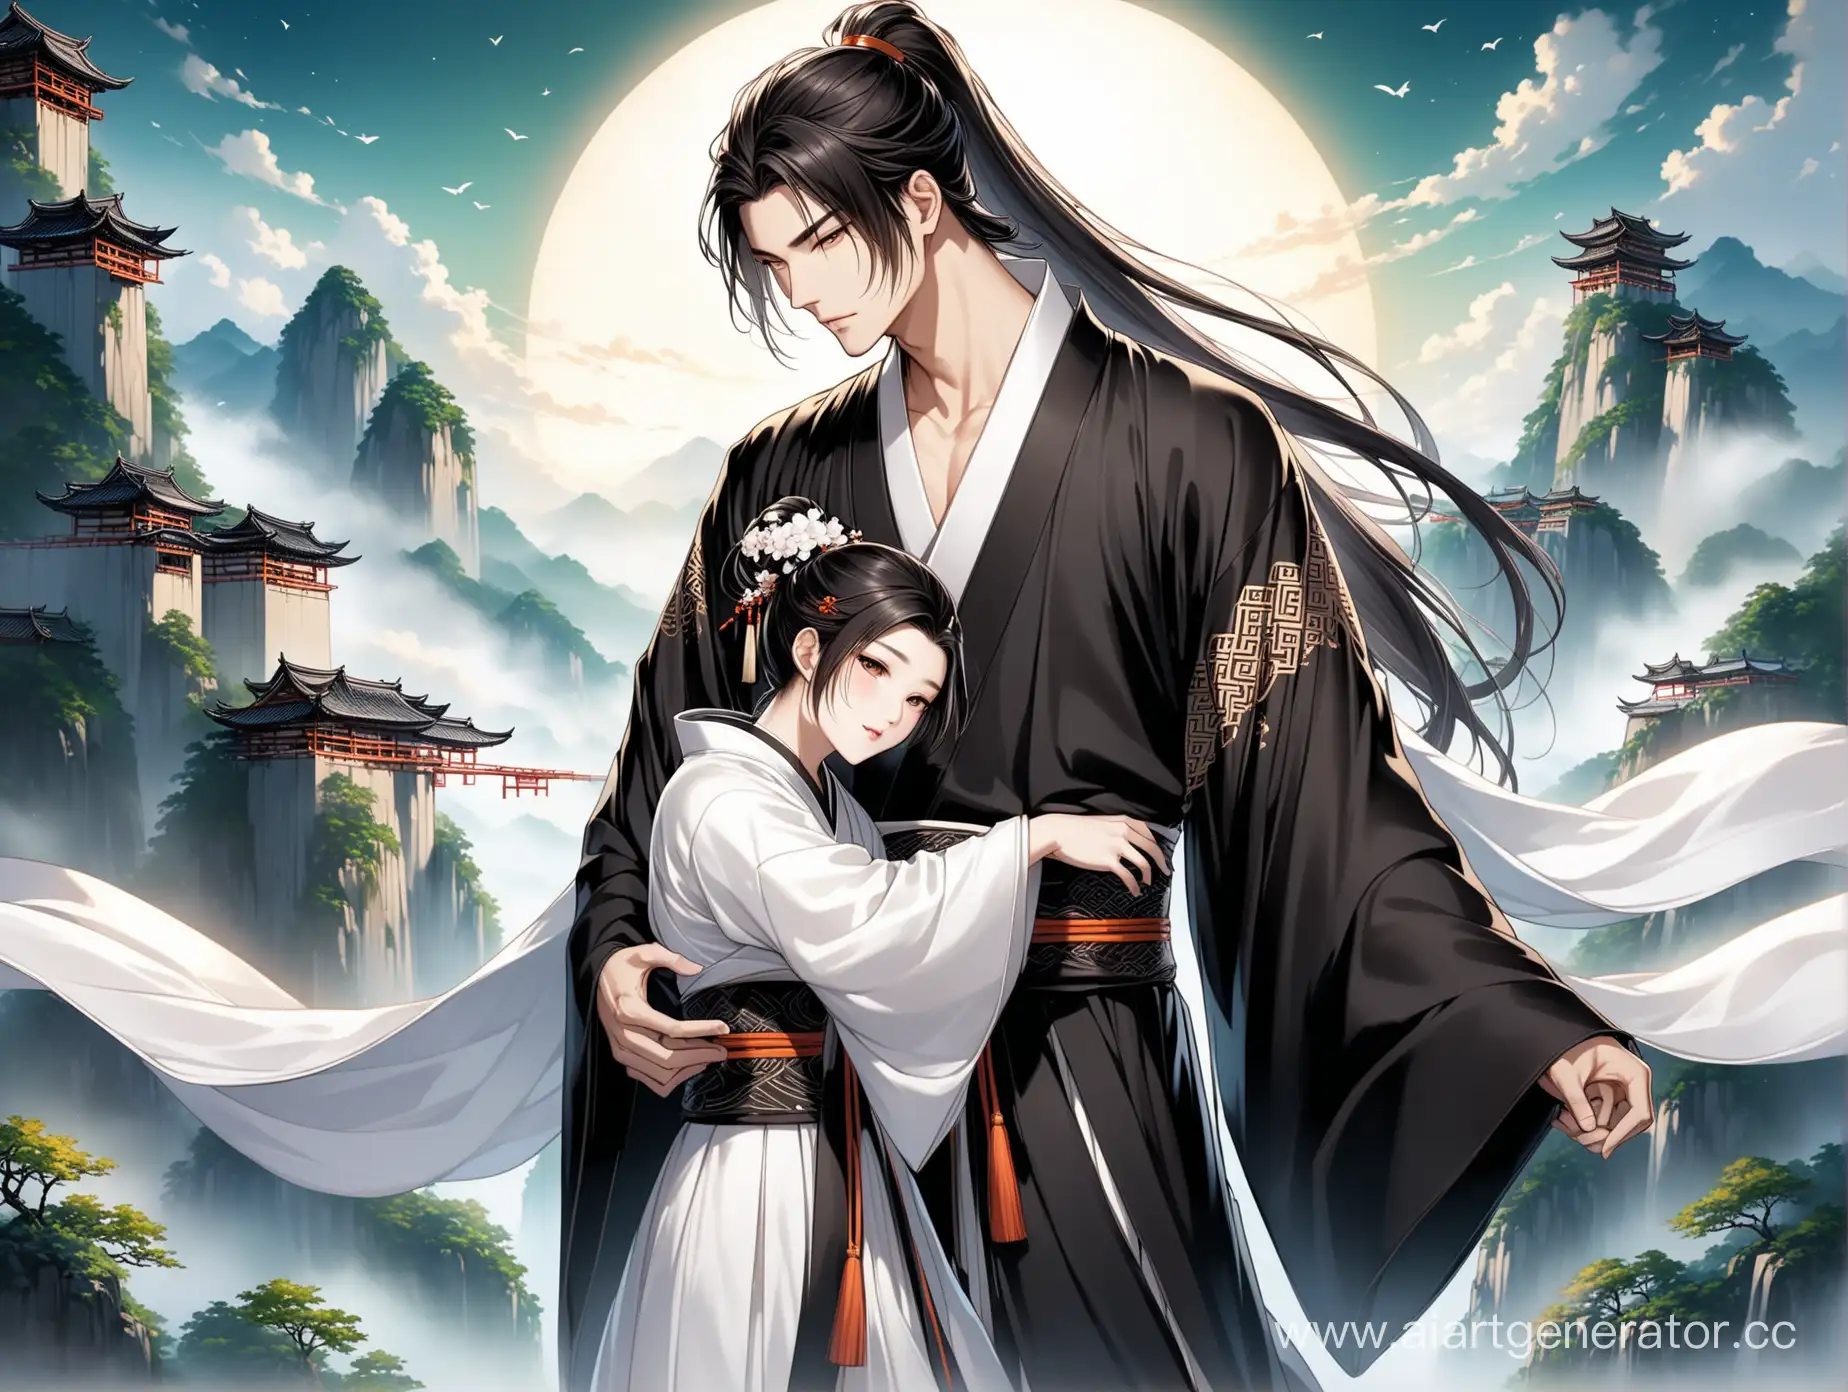 (Two graceful mens), in white and black hanfu, a noble appearance, long beautiful eyes, one man's hair is tied up high in a noble ponytail, cascading down his back, while the other's long dark hair flows freely around his shoulders. The intricately designed white and black hanfu, with their bright colors and bold patterns, are a testament to the exquisite craftsmanship of the xianxia world. The high definition, ultra-realistic depiction of the scene transports you into this mystical realm, with the best quality, hyper-detailed images